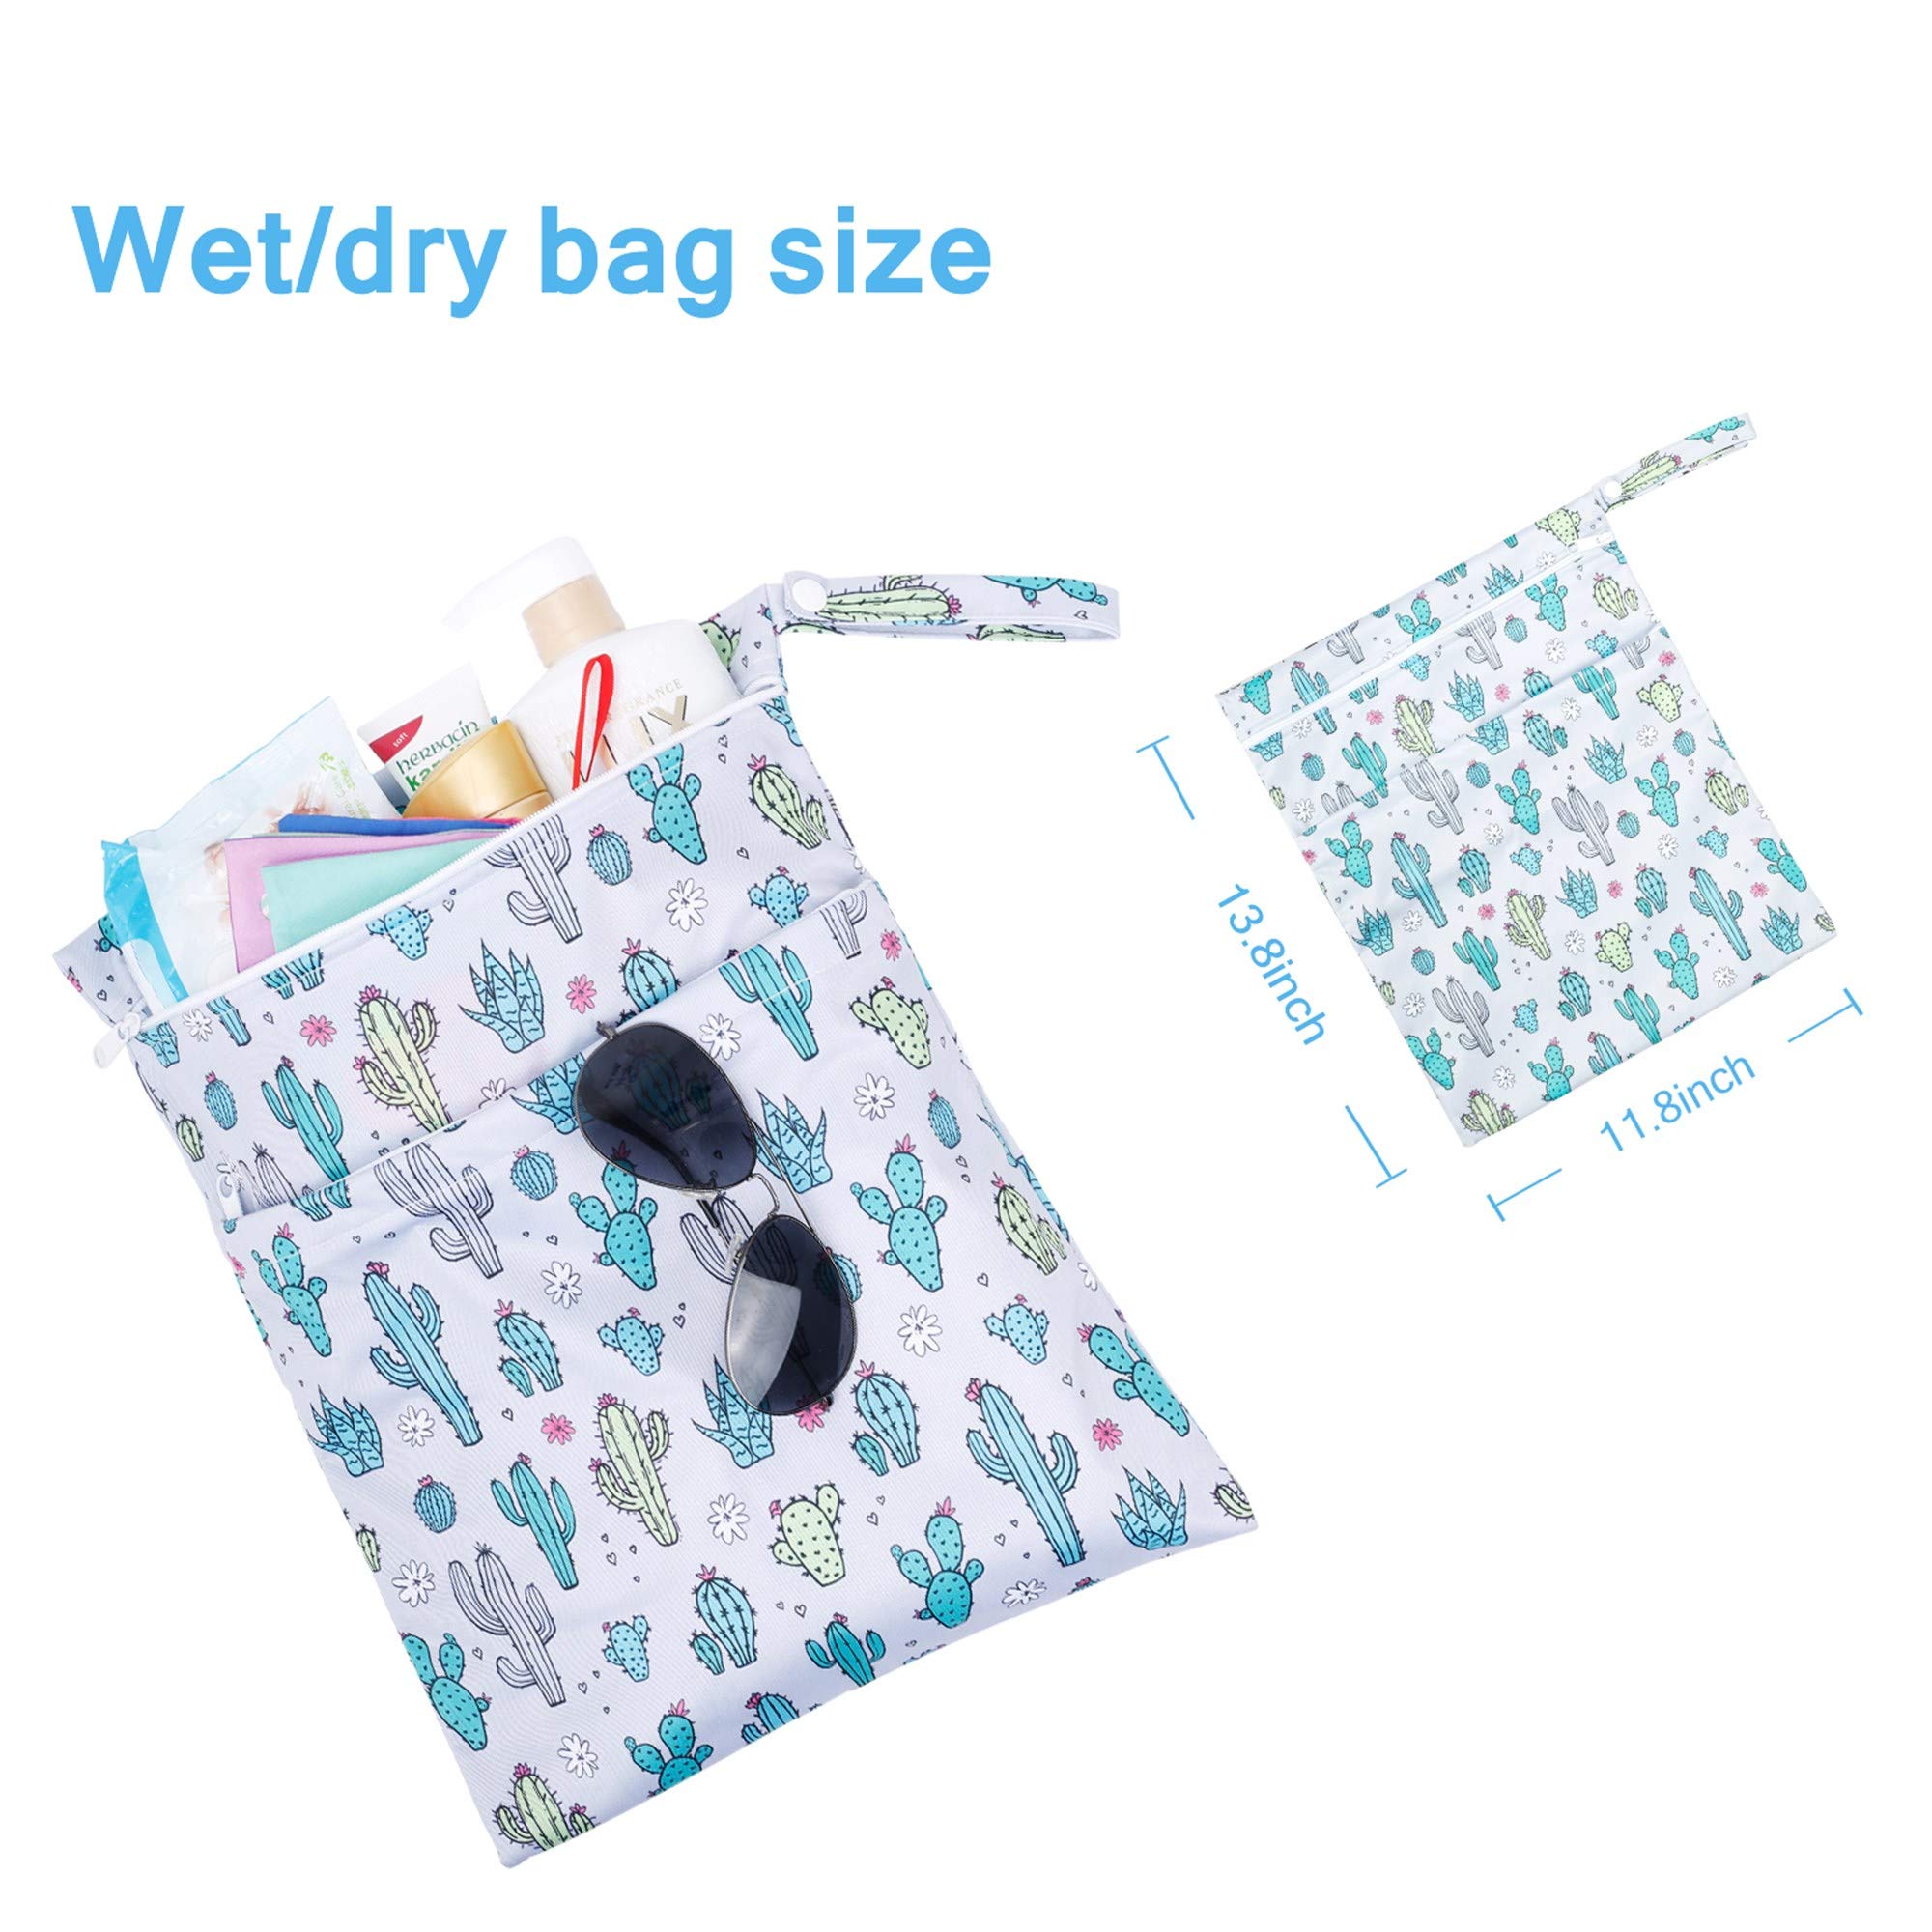 TRENSOM Wet Dry Bag for Breast Pump Parts Waterproof Reusable bags with Two Zippered Pockets Heart Cactus Wet Bag for Cloth Diapers Travel Beach Pool Yoga Gym Bag for Swimsuits Wet Clothes 2 pcs